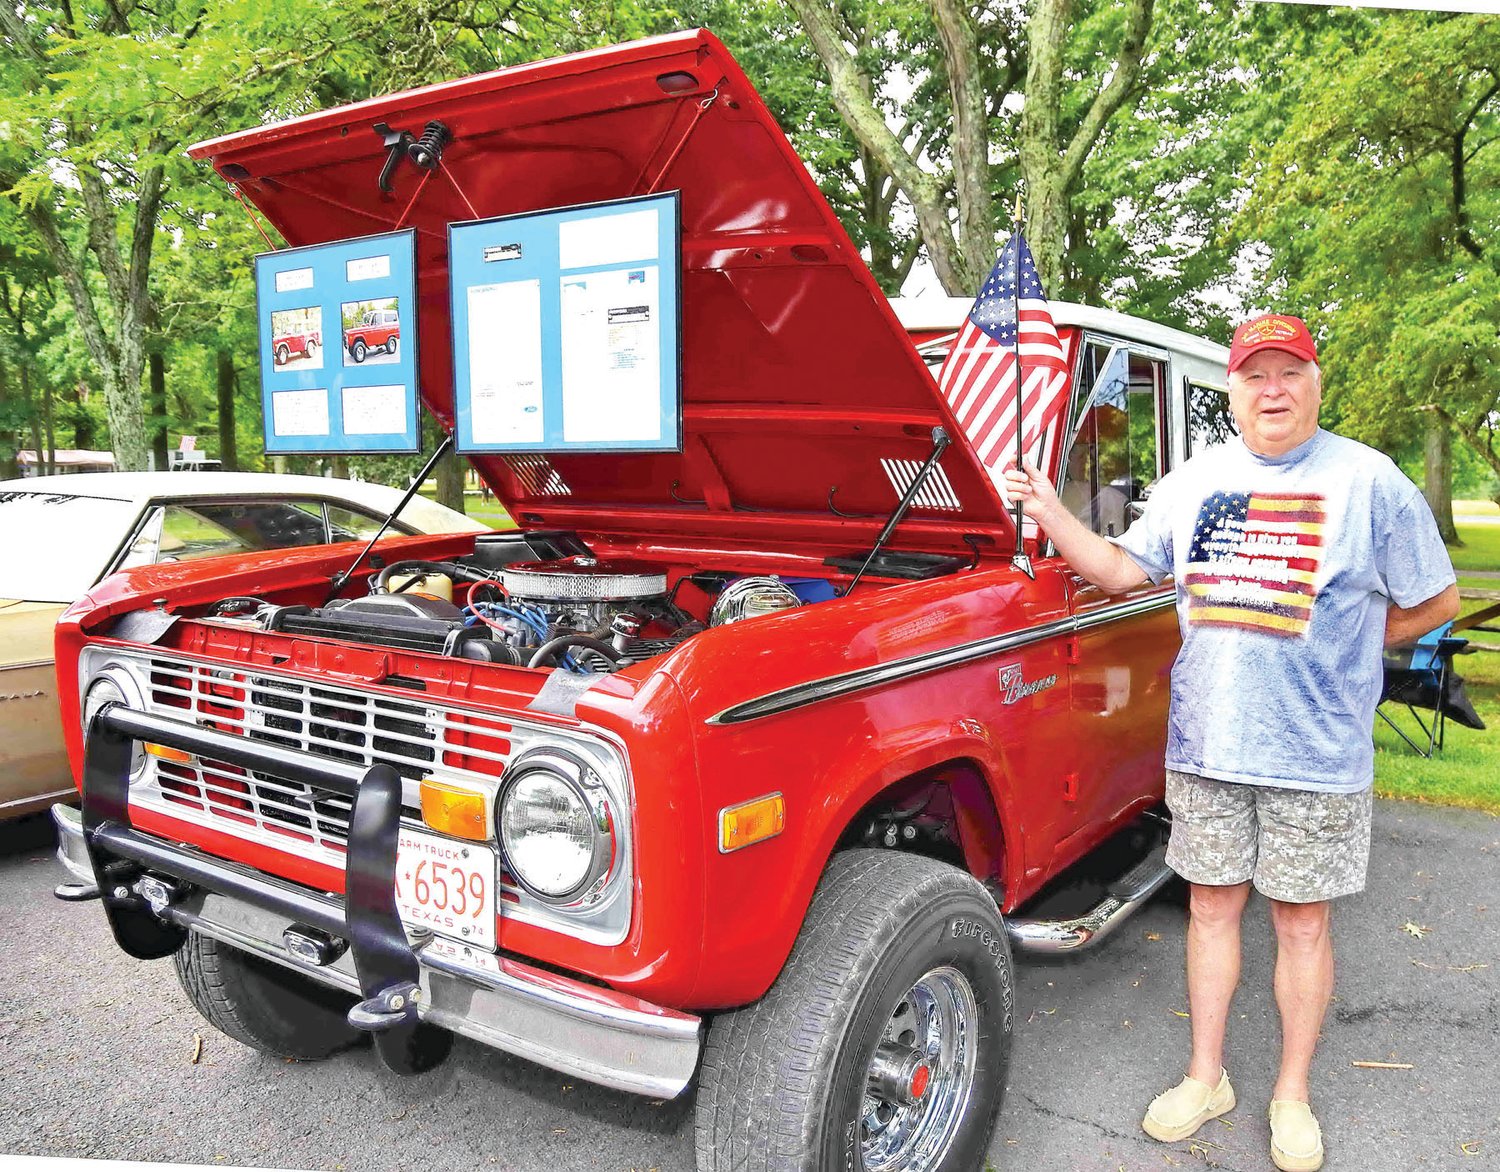 Marine veteran Bill Aycock with his all-American 1974 Ford Bronco.